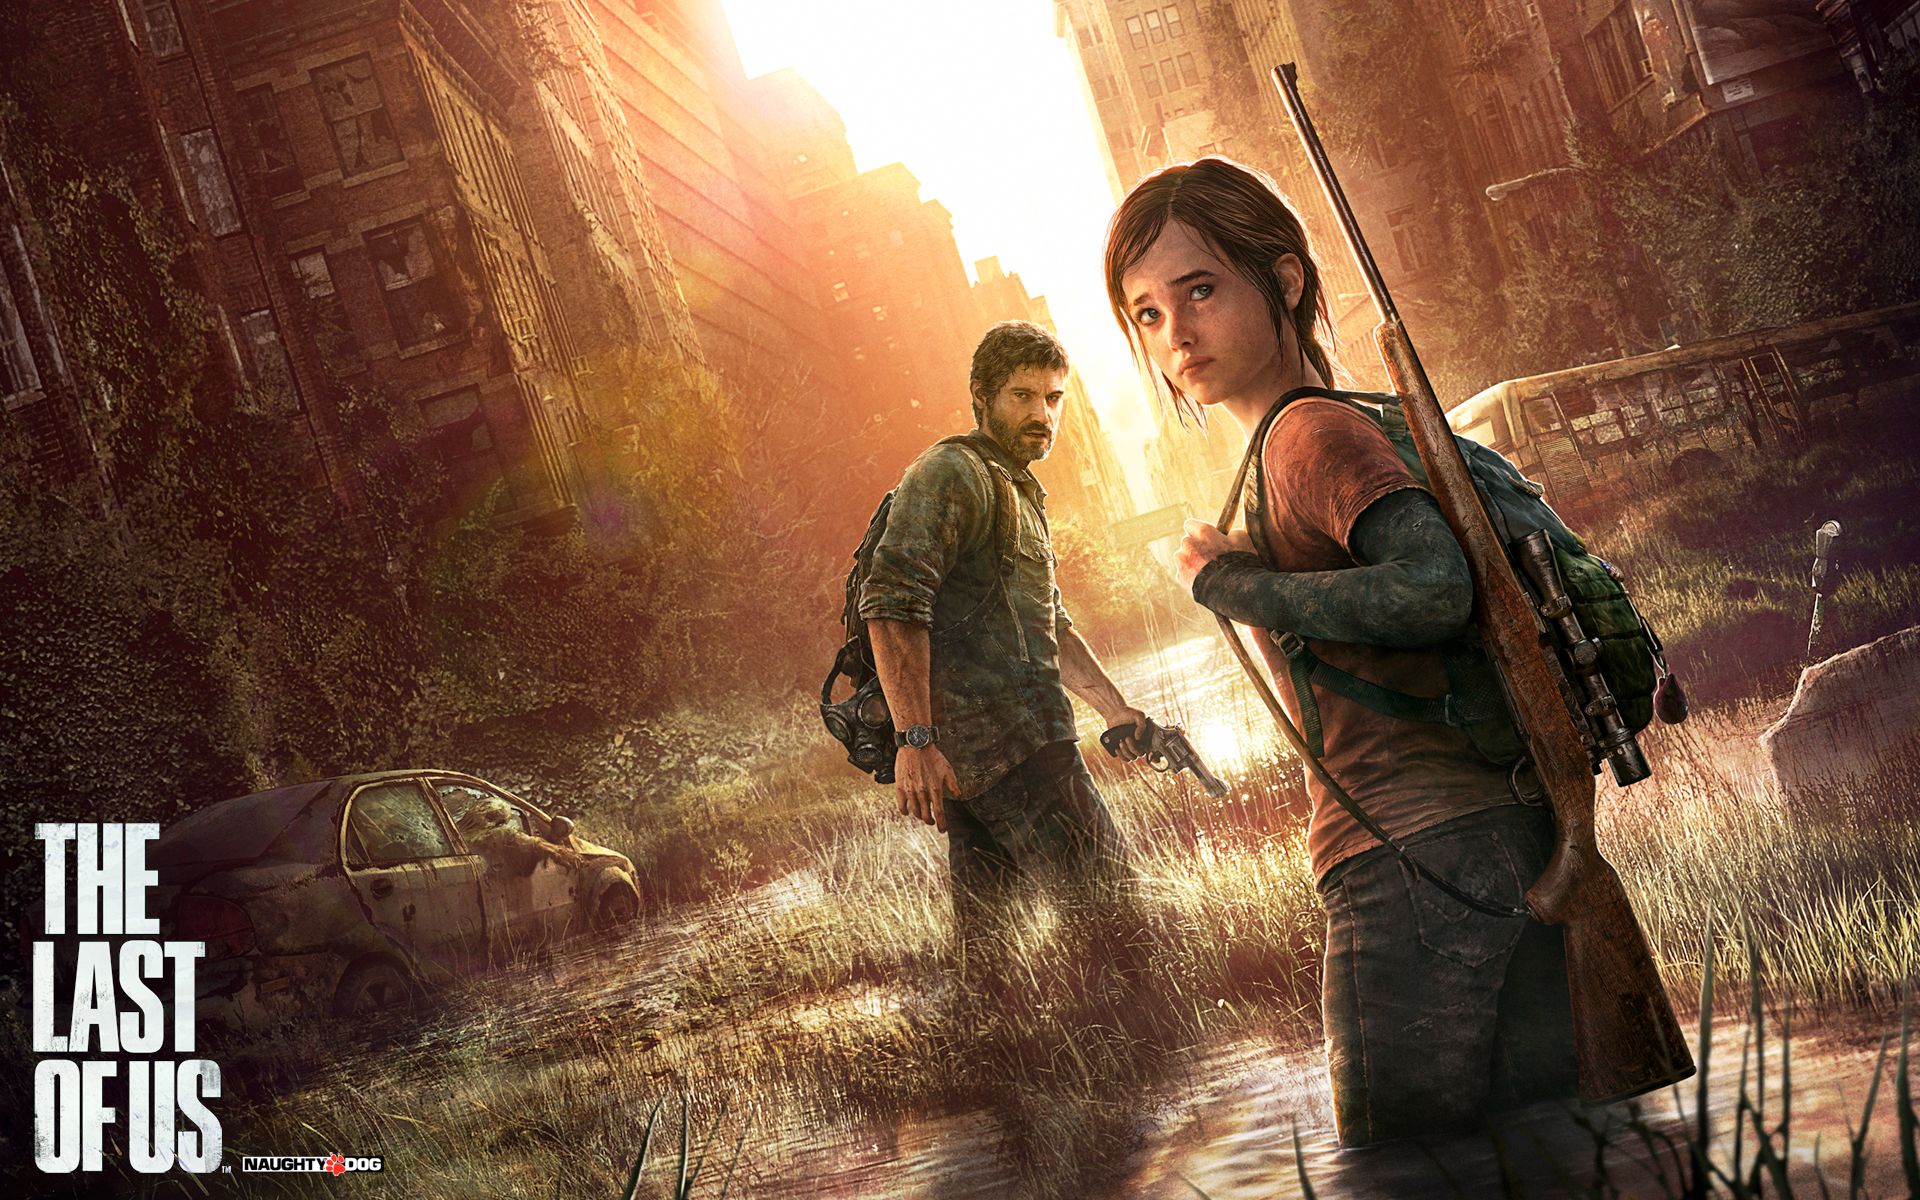 The Last of Us PC woes continue, as Naughty Dog pushes hotfix